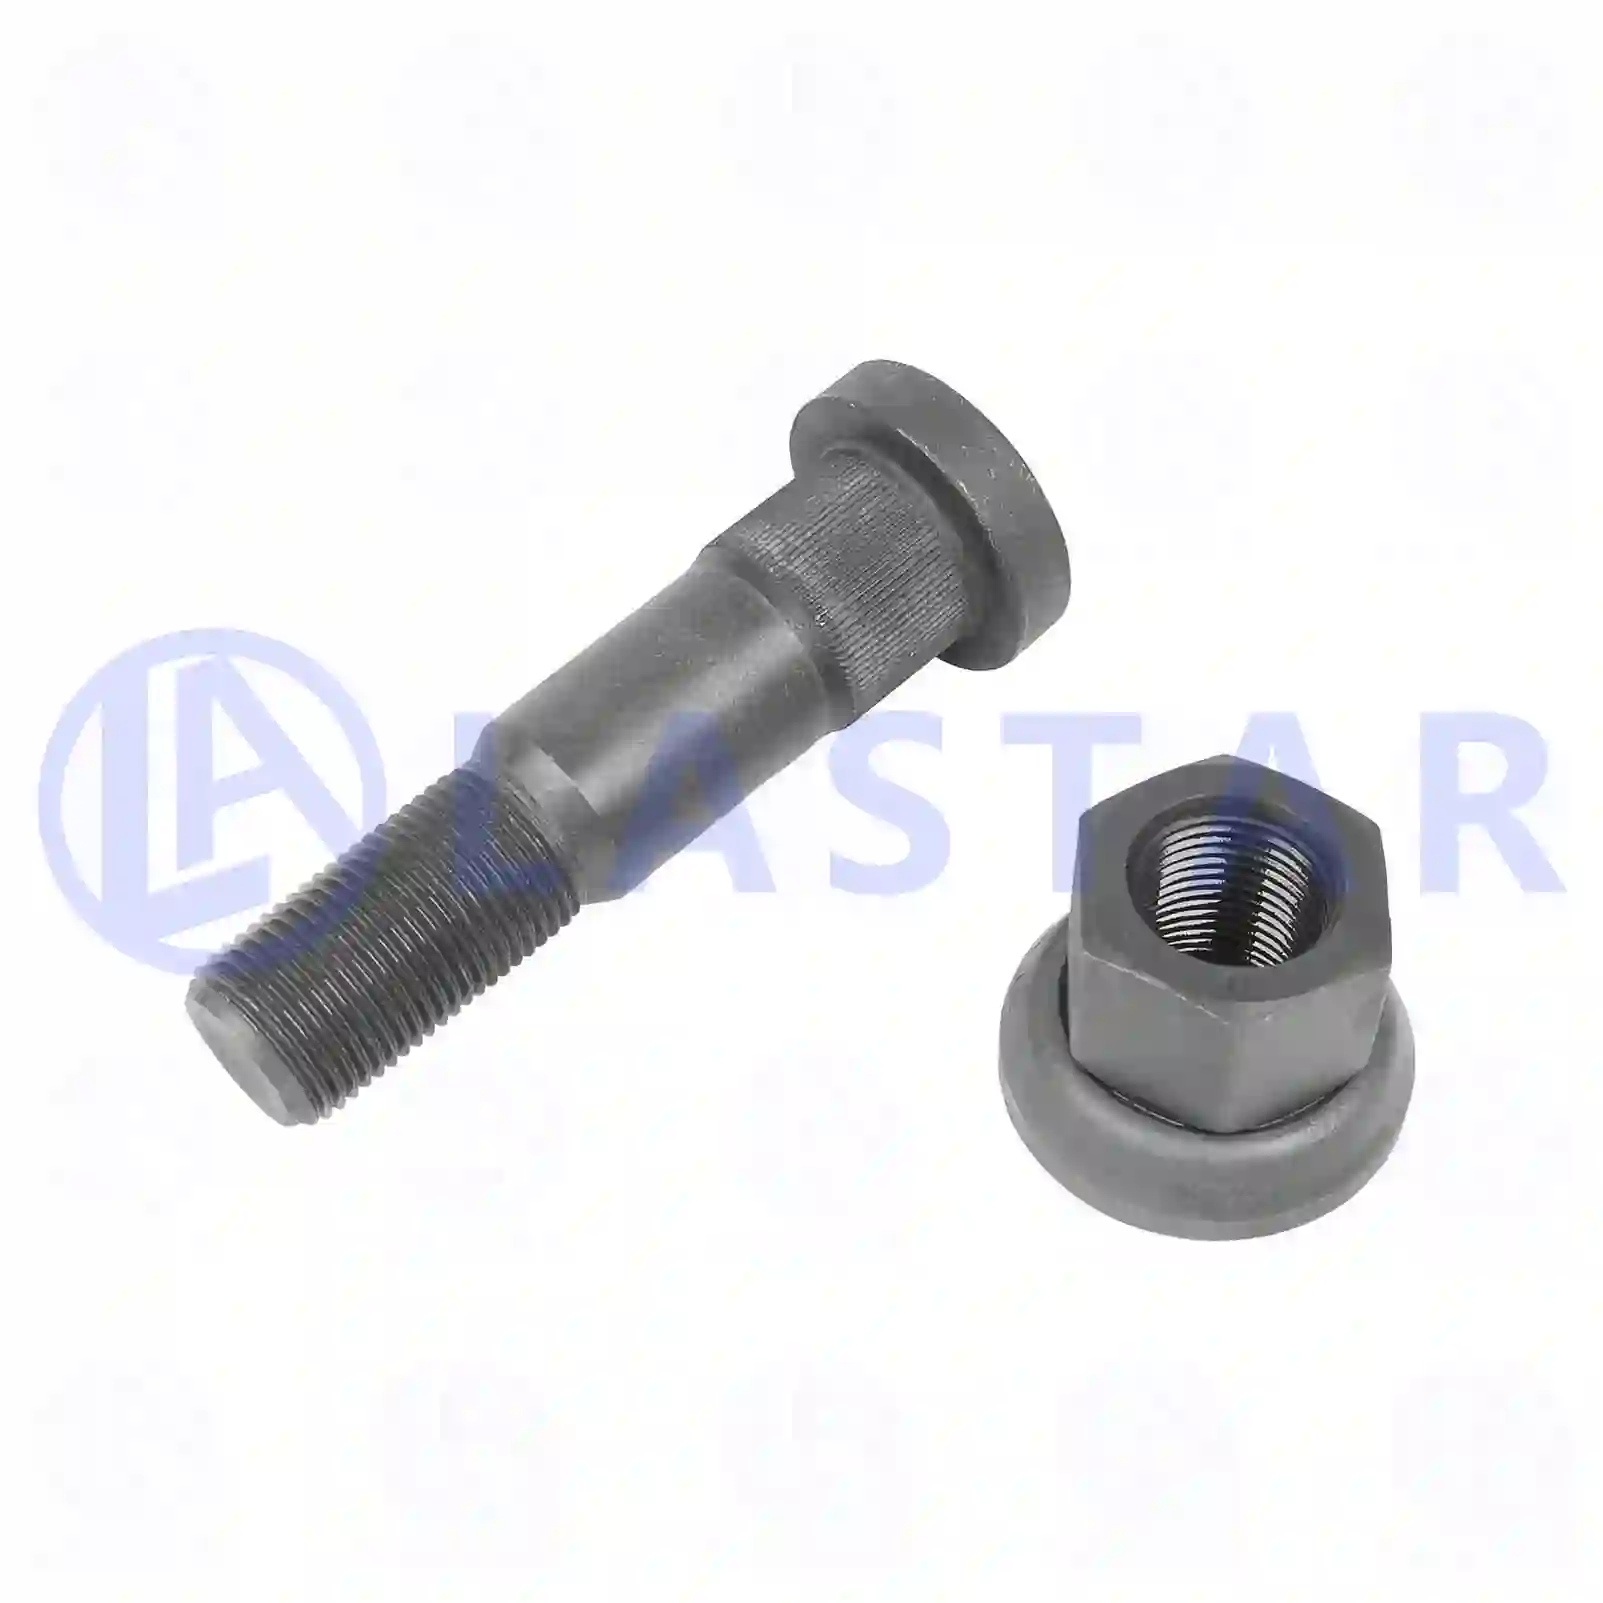 Wheel bolt, complete, 77726859, 1573082S, , , , , , ||  77726859 Lastar Spare Part | Truck Spare Parts, Auotomotive Spare Parts Wheel bolt, complete, 77726859, 1573082S, , , , , , ||  77726859 Lastar Spare Part | Truck Spare Parts, Auotomotive Spare Parts